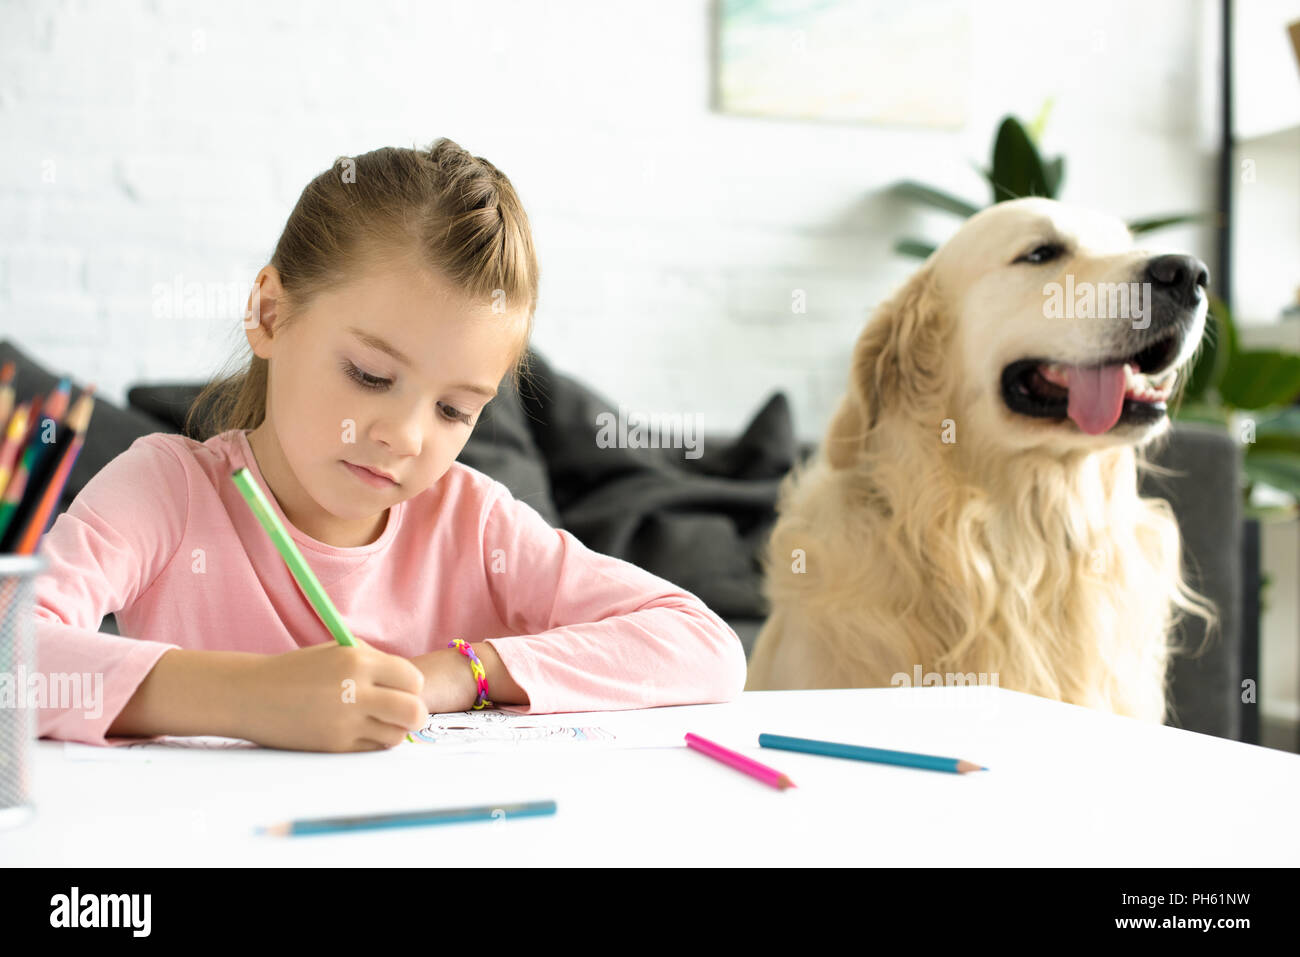 portrait of cute child drawing picture with pencils with golden retriever dog near by at home Stock Photo